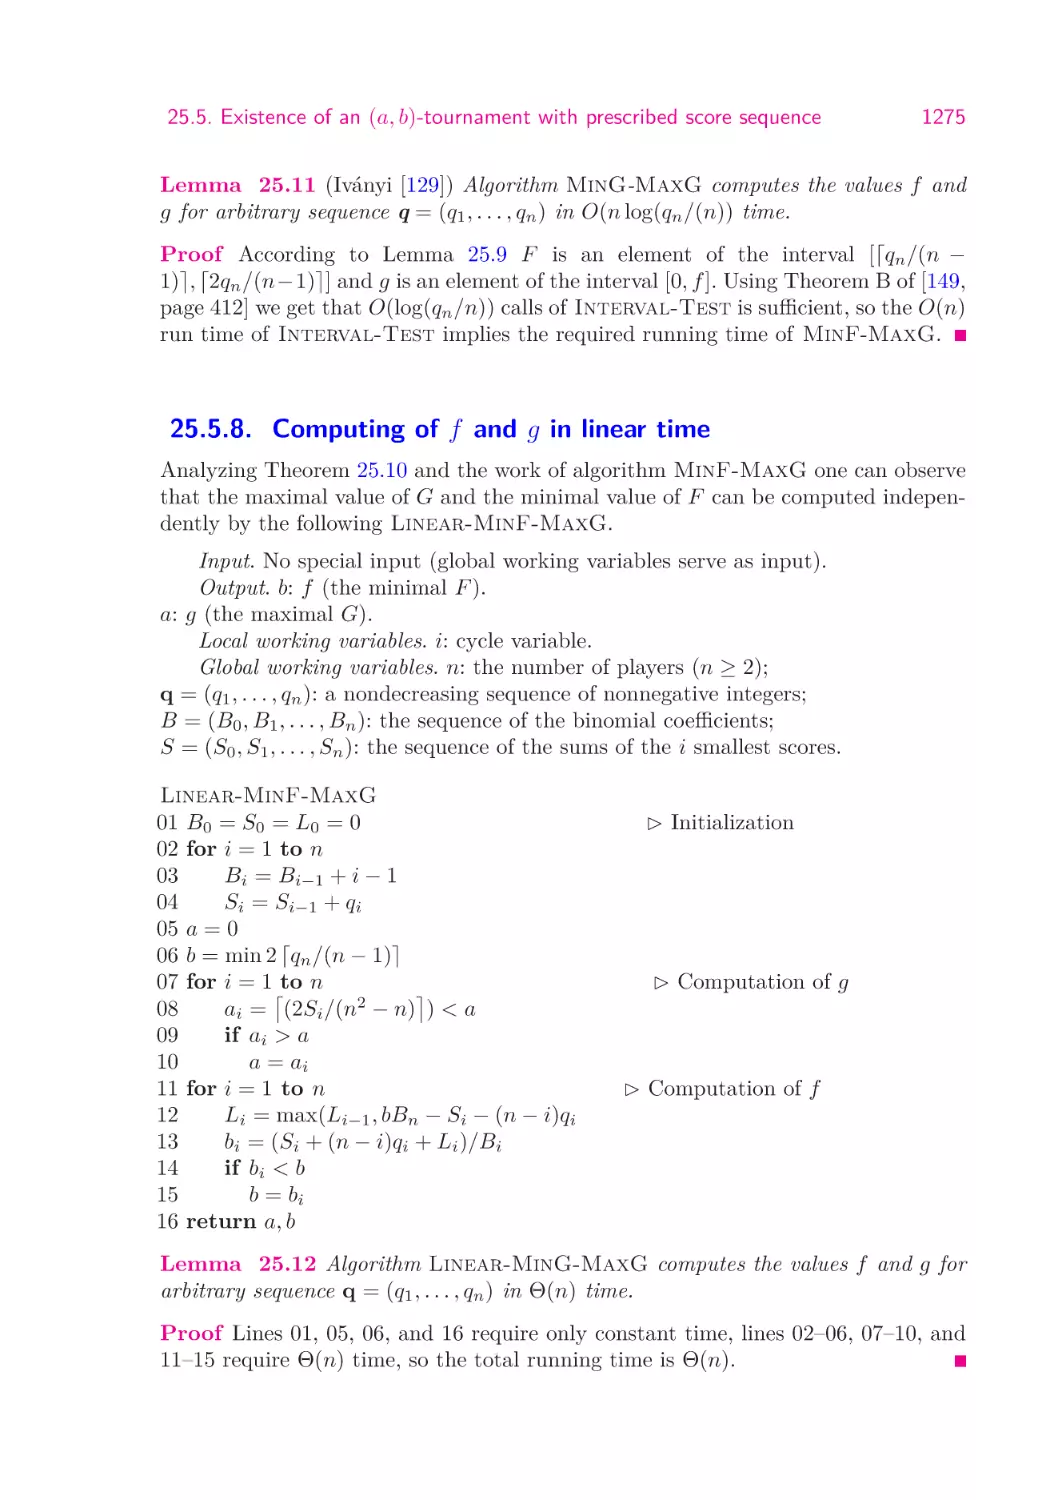 25.5.8.  Computing of f and g in linear time